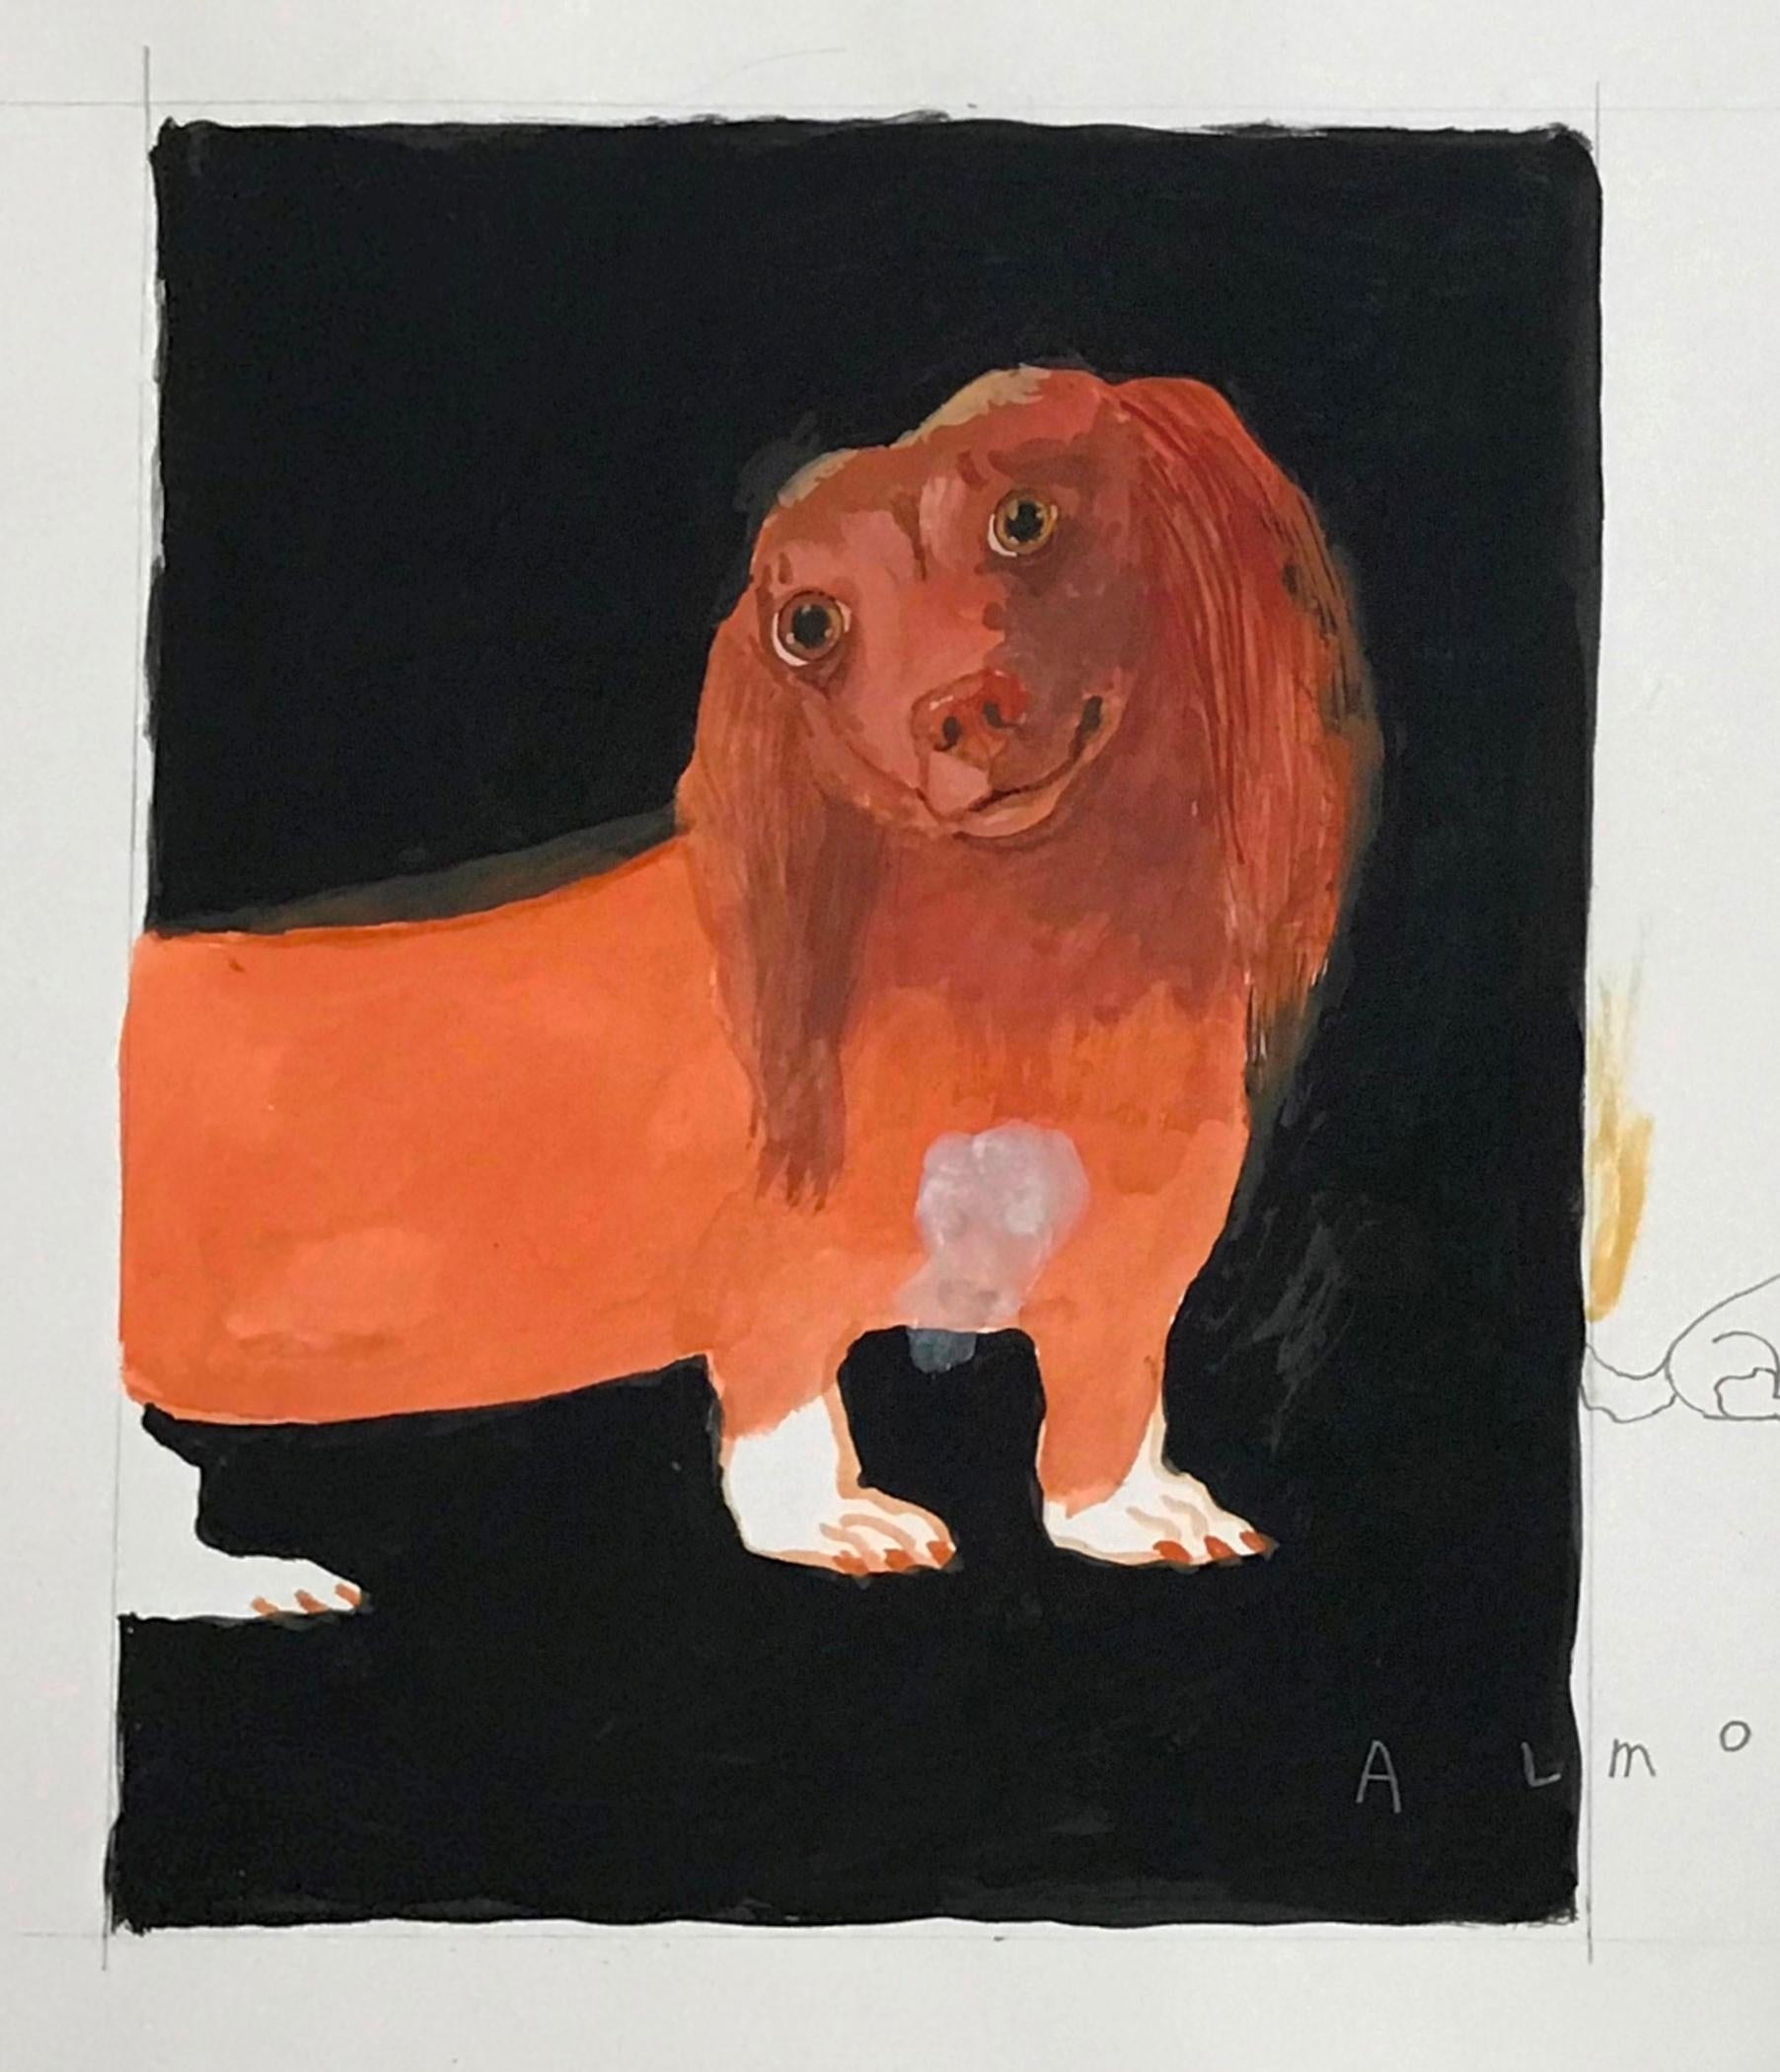 Contemporary, sentimental painting of a red Dachshund with graphite drawings  - Painting by Robert Zakanitch